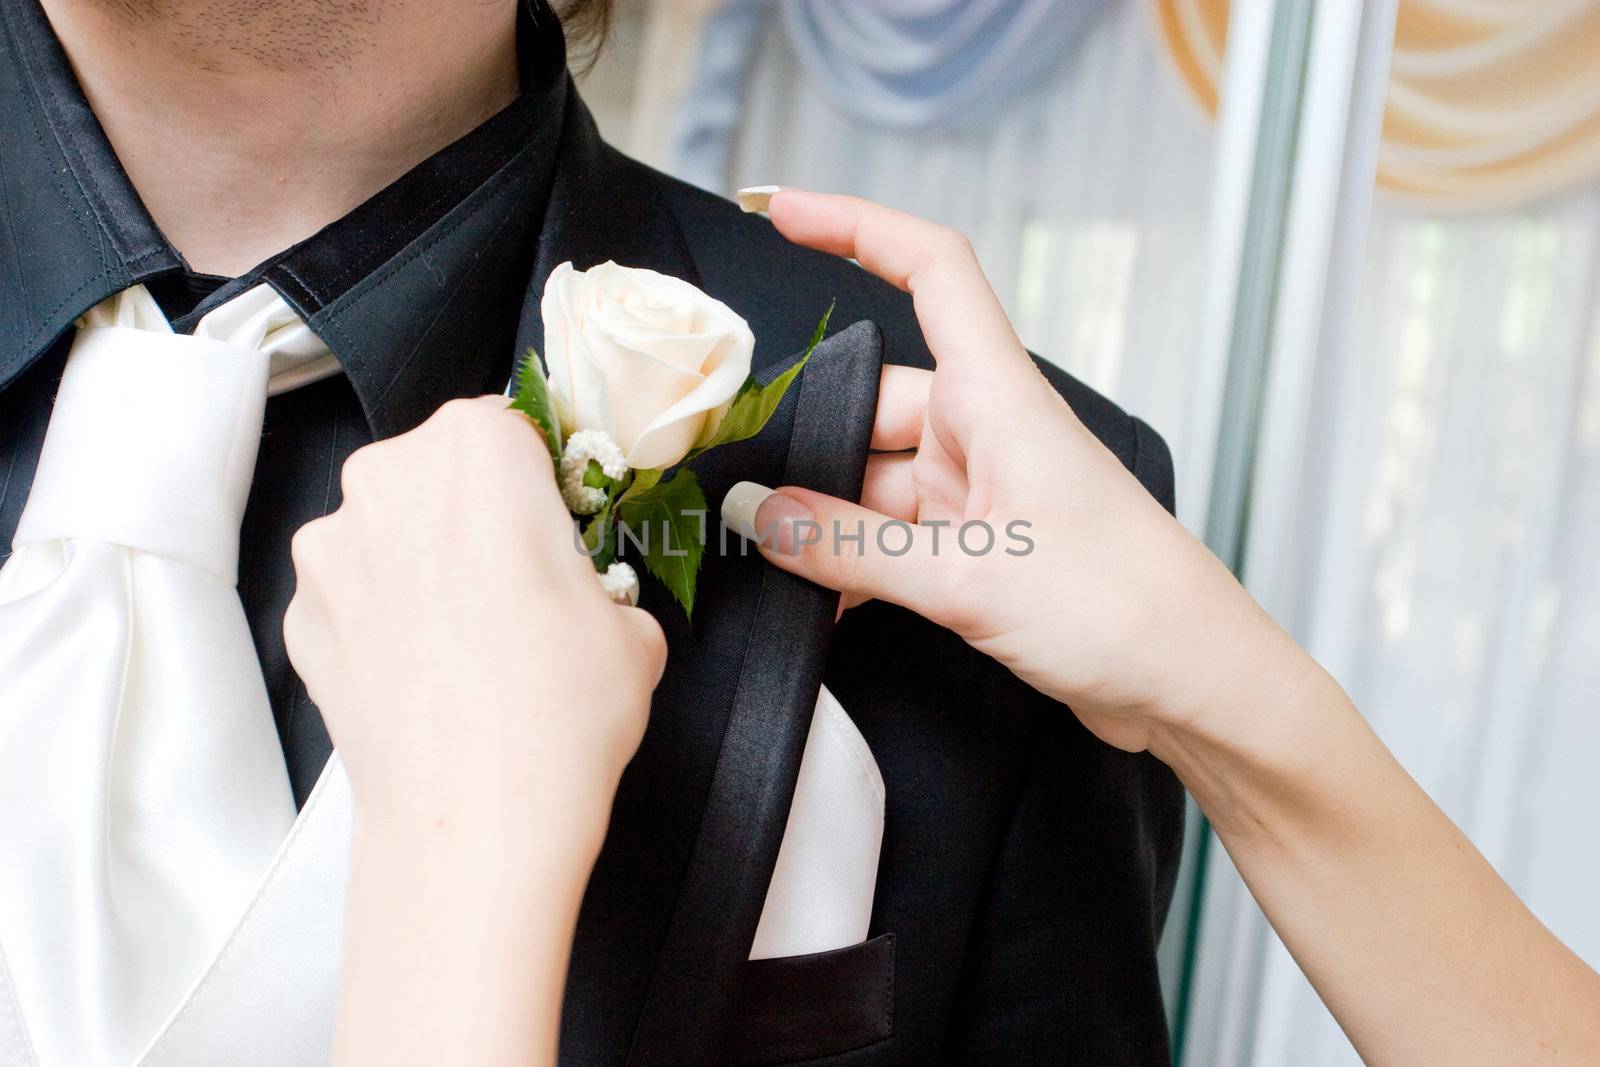 hands of the girl attach a rose to the suit of the man